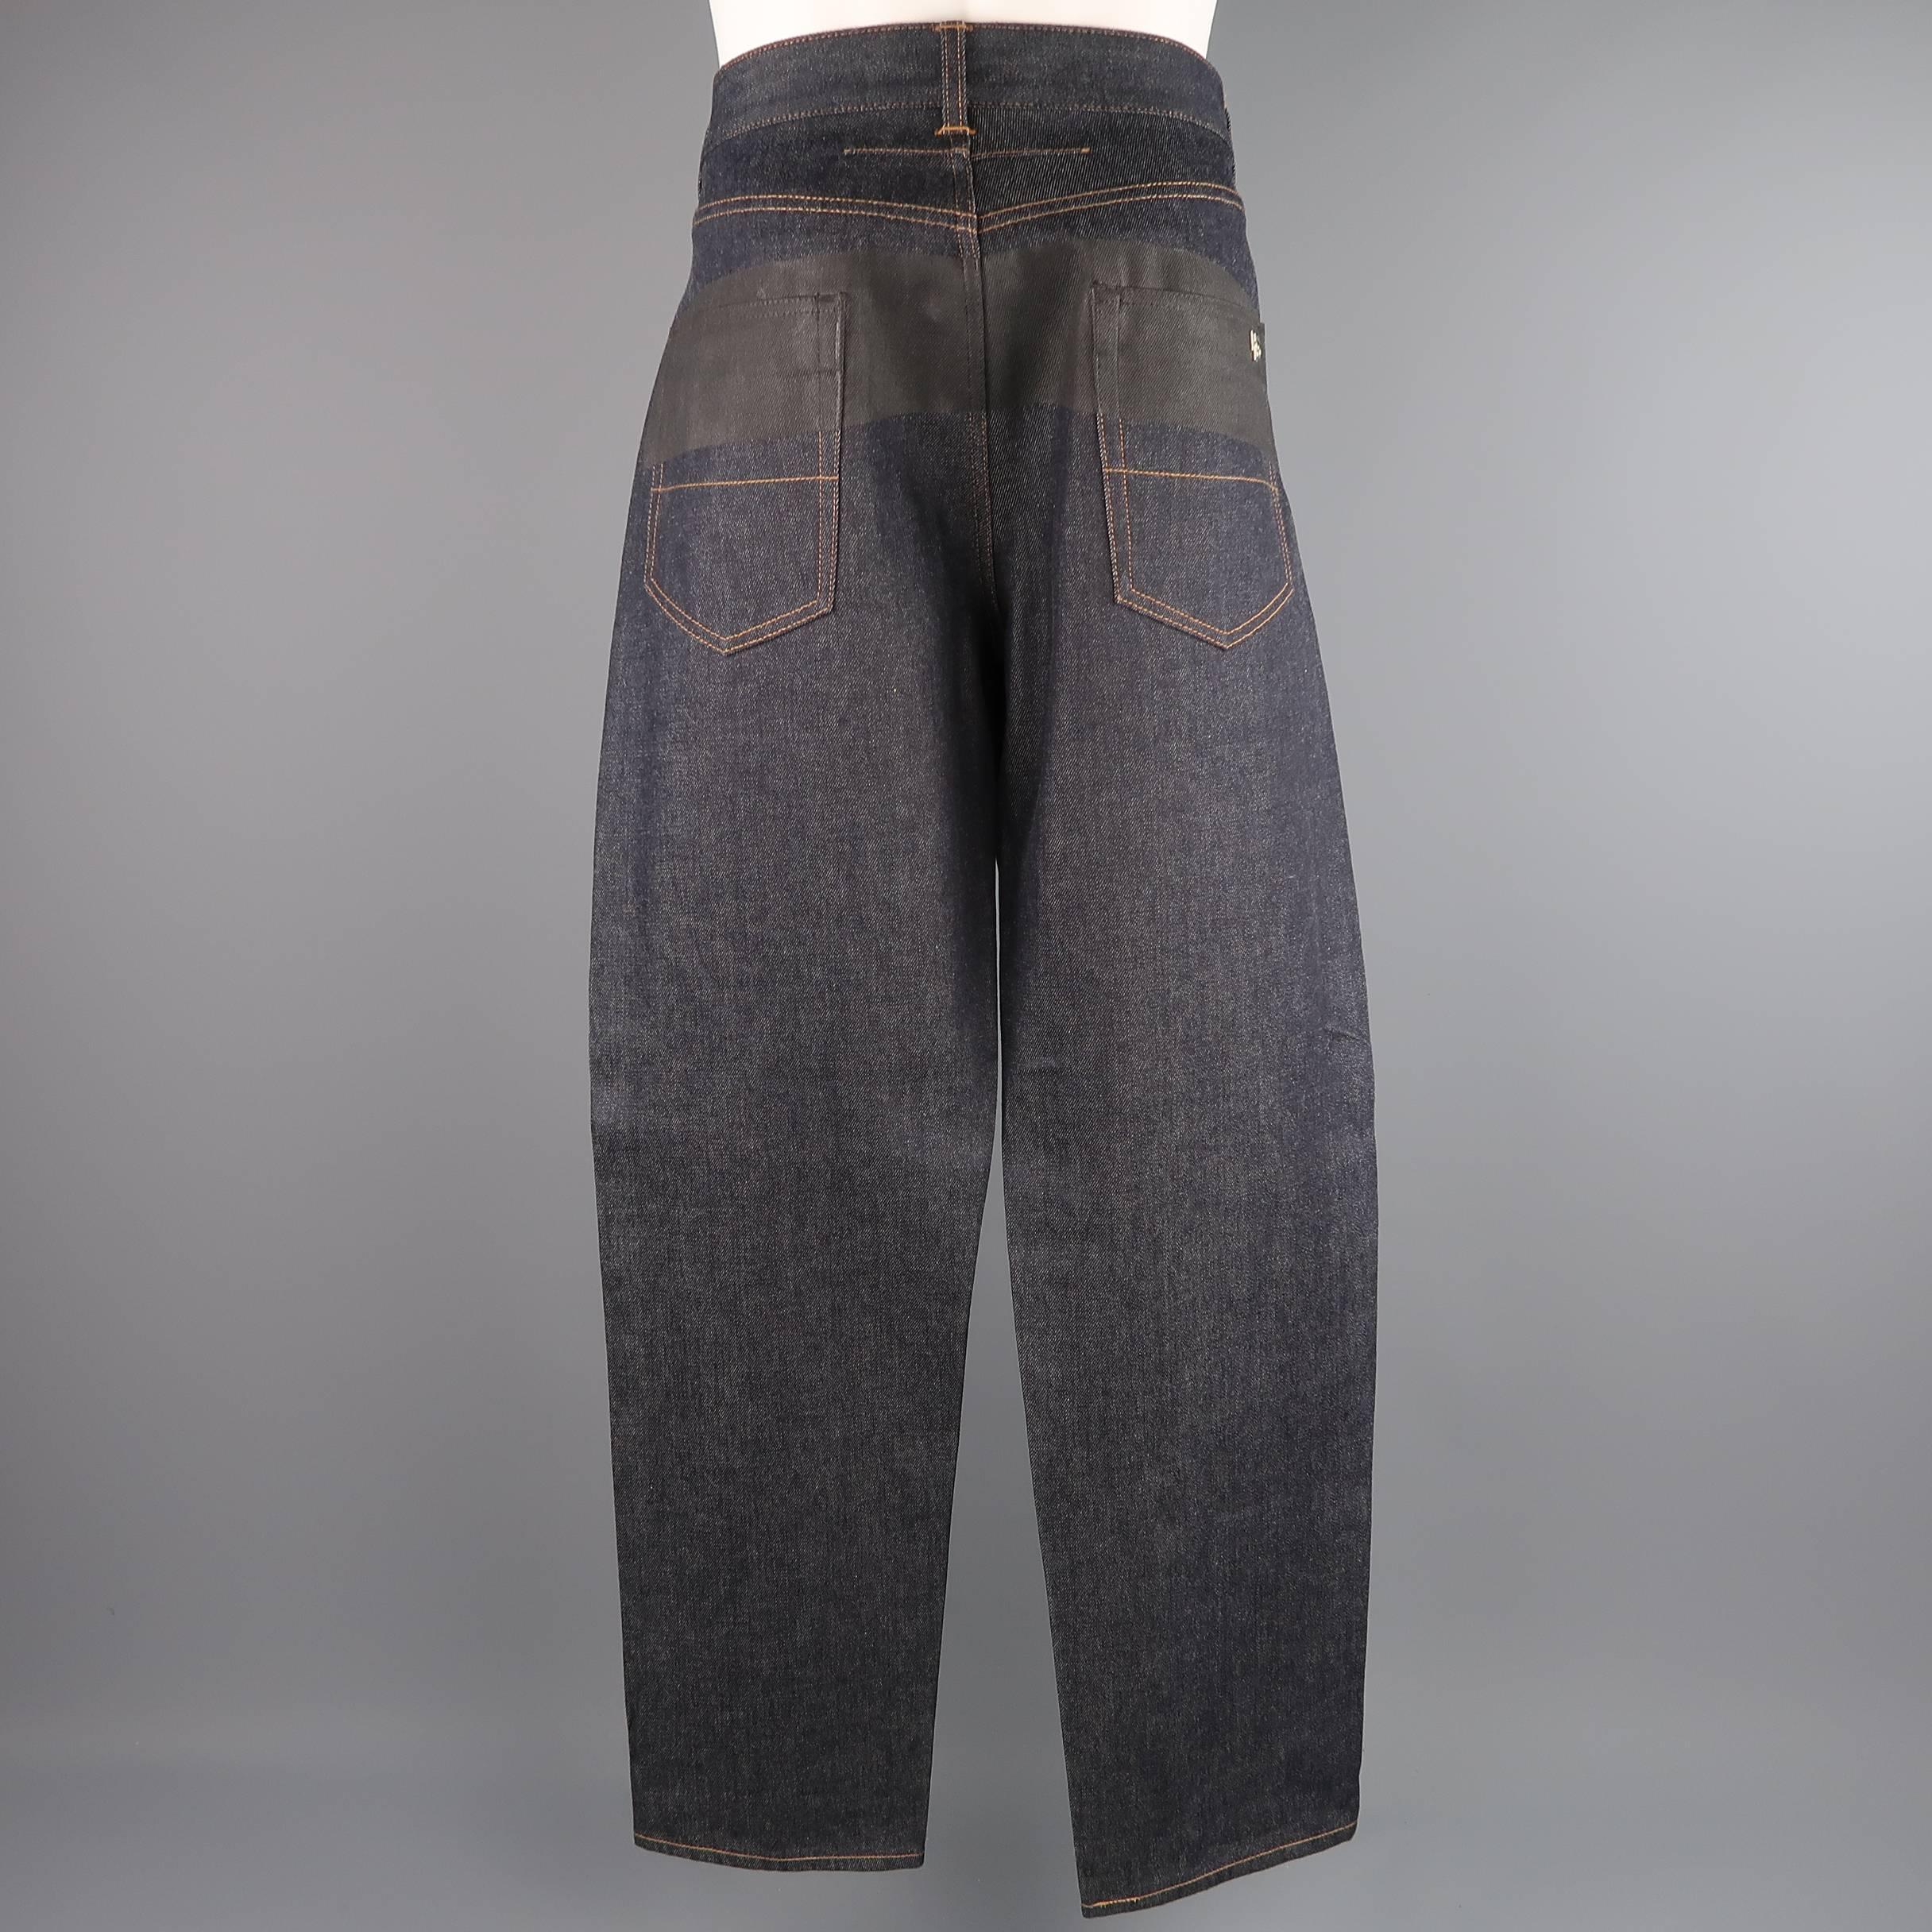 GIVENCHY by Riccardo Tisci jeans come in dark raw denim and feature a classic rise, loose relaxed fit, tan contrast stitching, silver tone metal HDG 